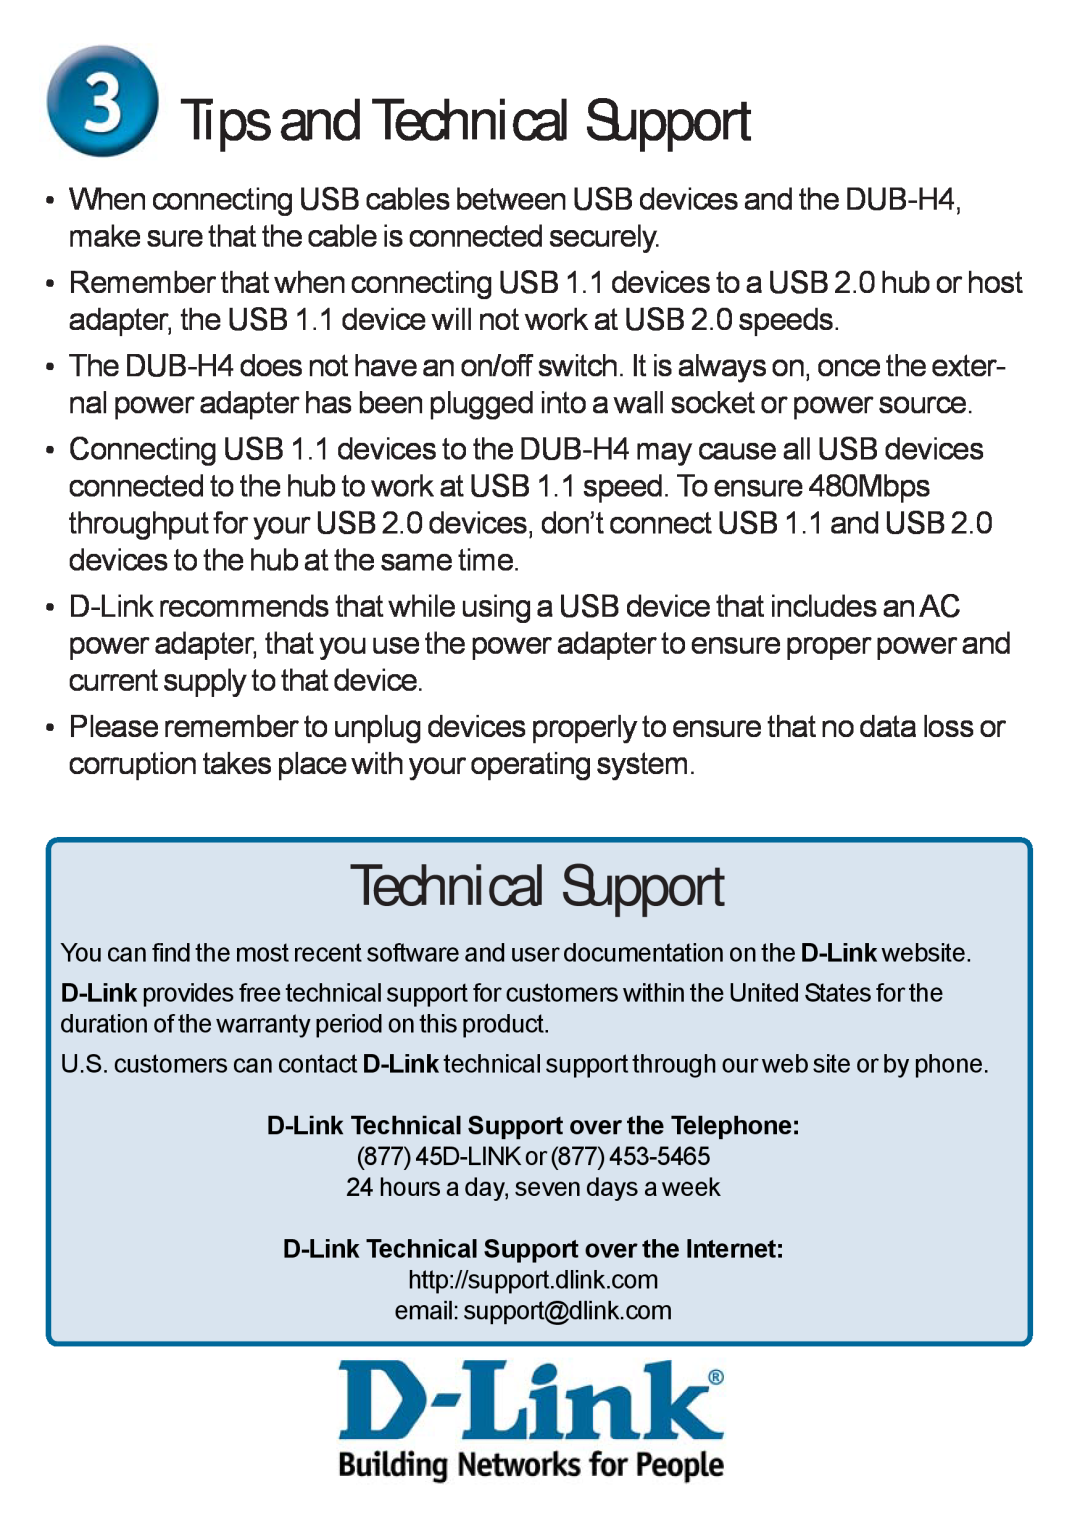 D-Link DUB-H4 warranty Tips and Technical Support, D-Link Technical Support over the Telephone 